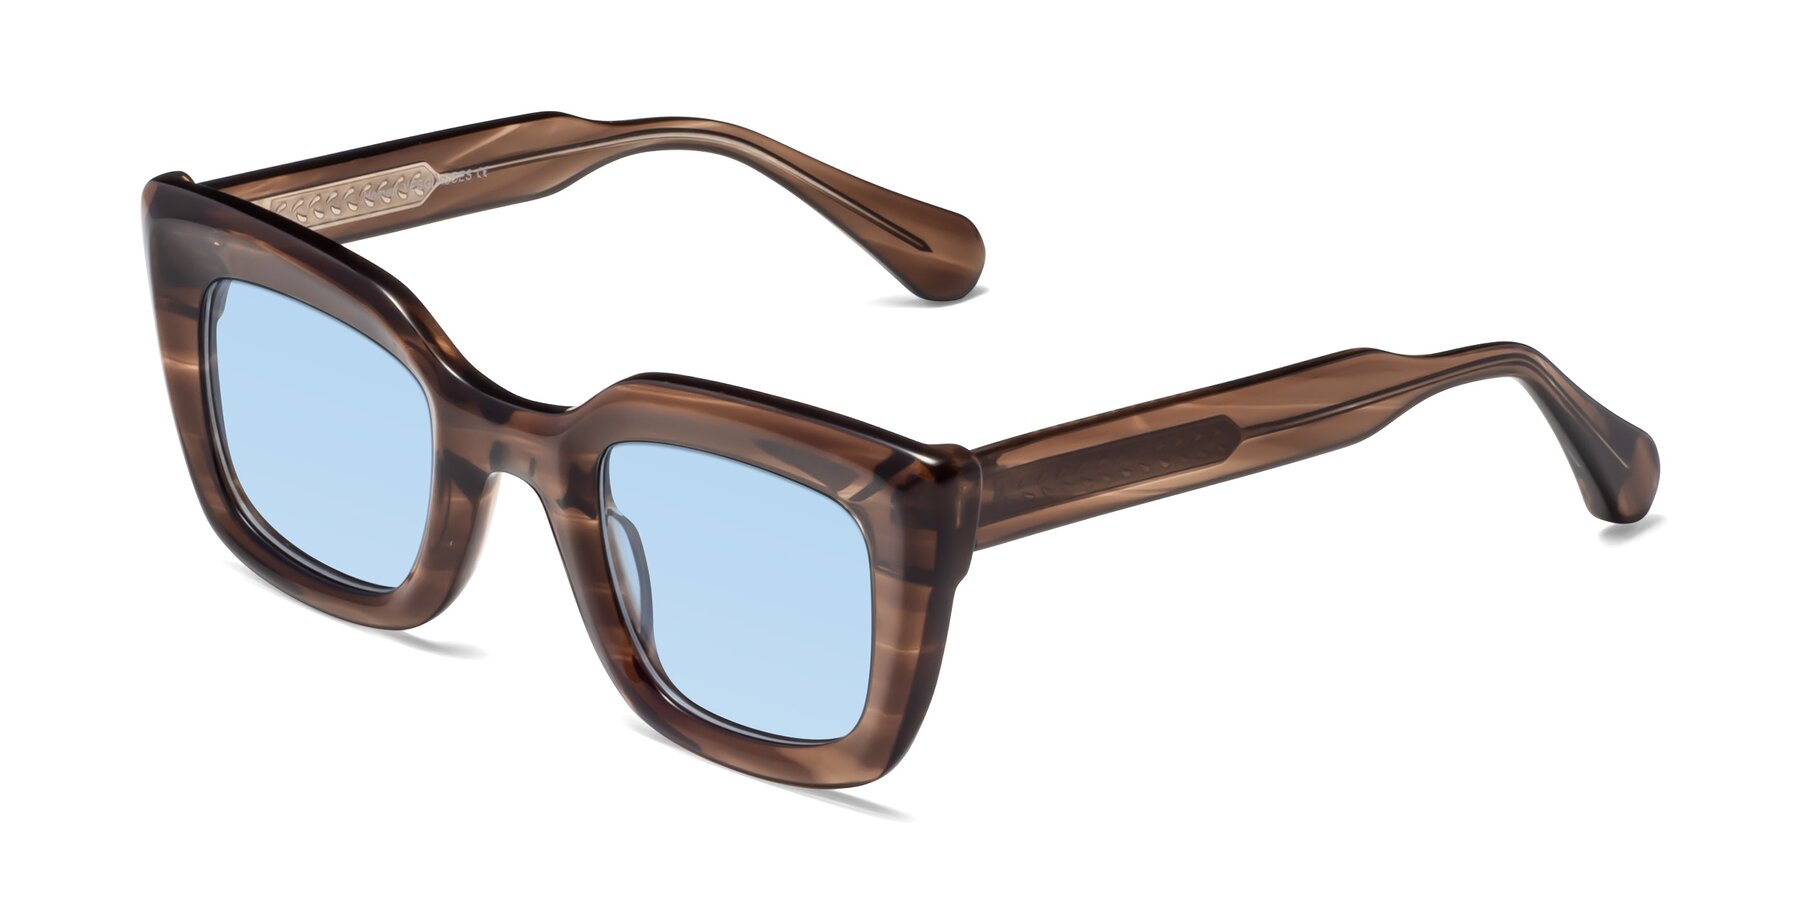 Angle of Homan in Chocolate with Light Blue Tinted Lenses